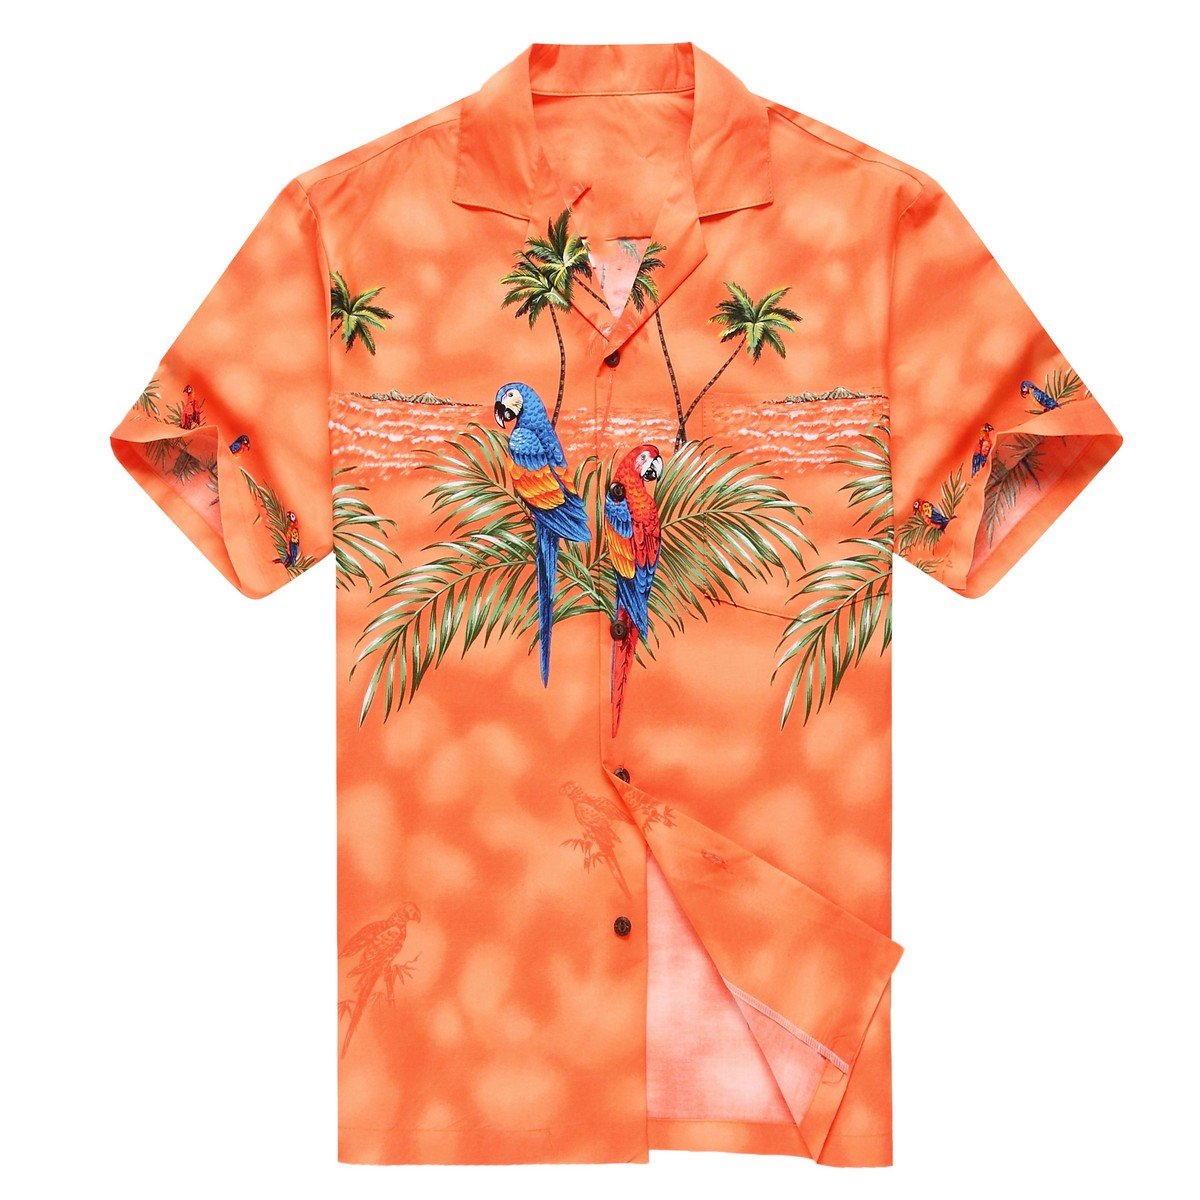 Men's Aloha Shirt Orange with Matching Front Parrots - Pinotee Store